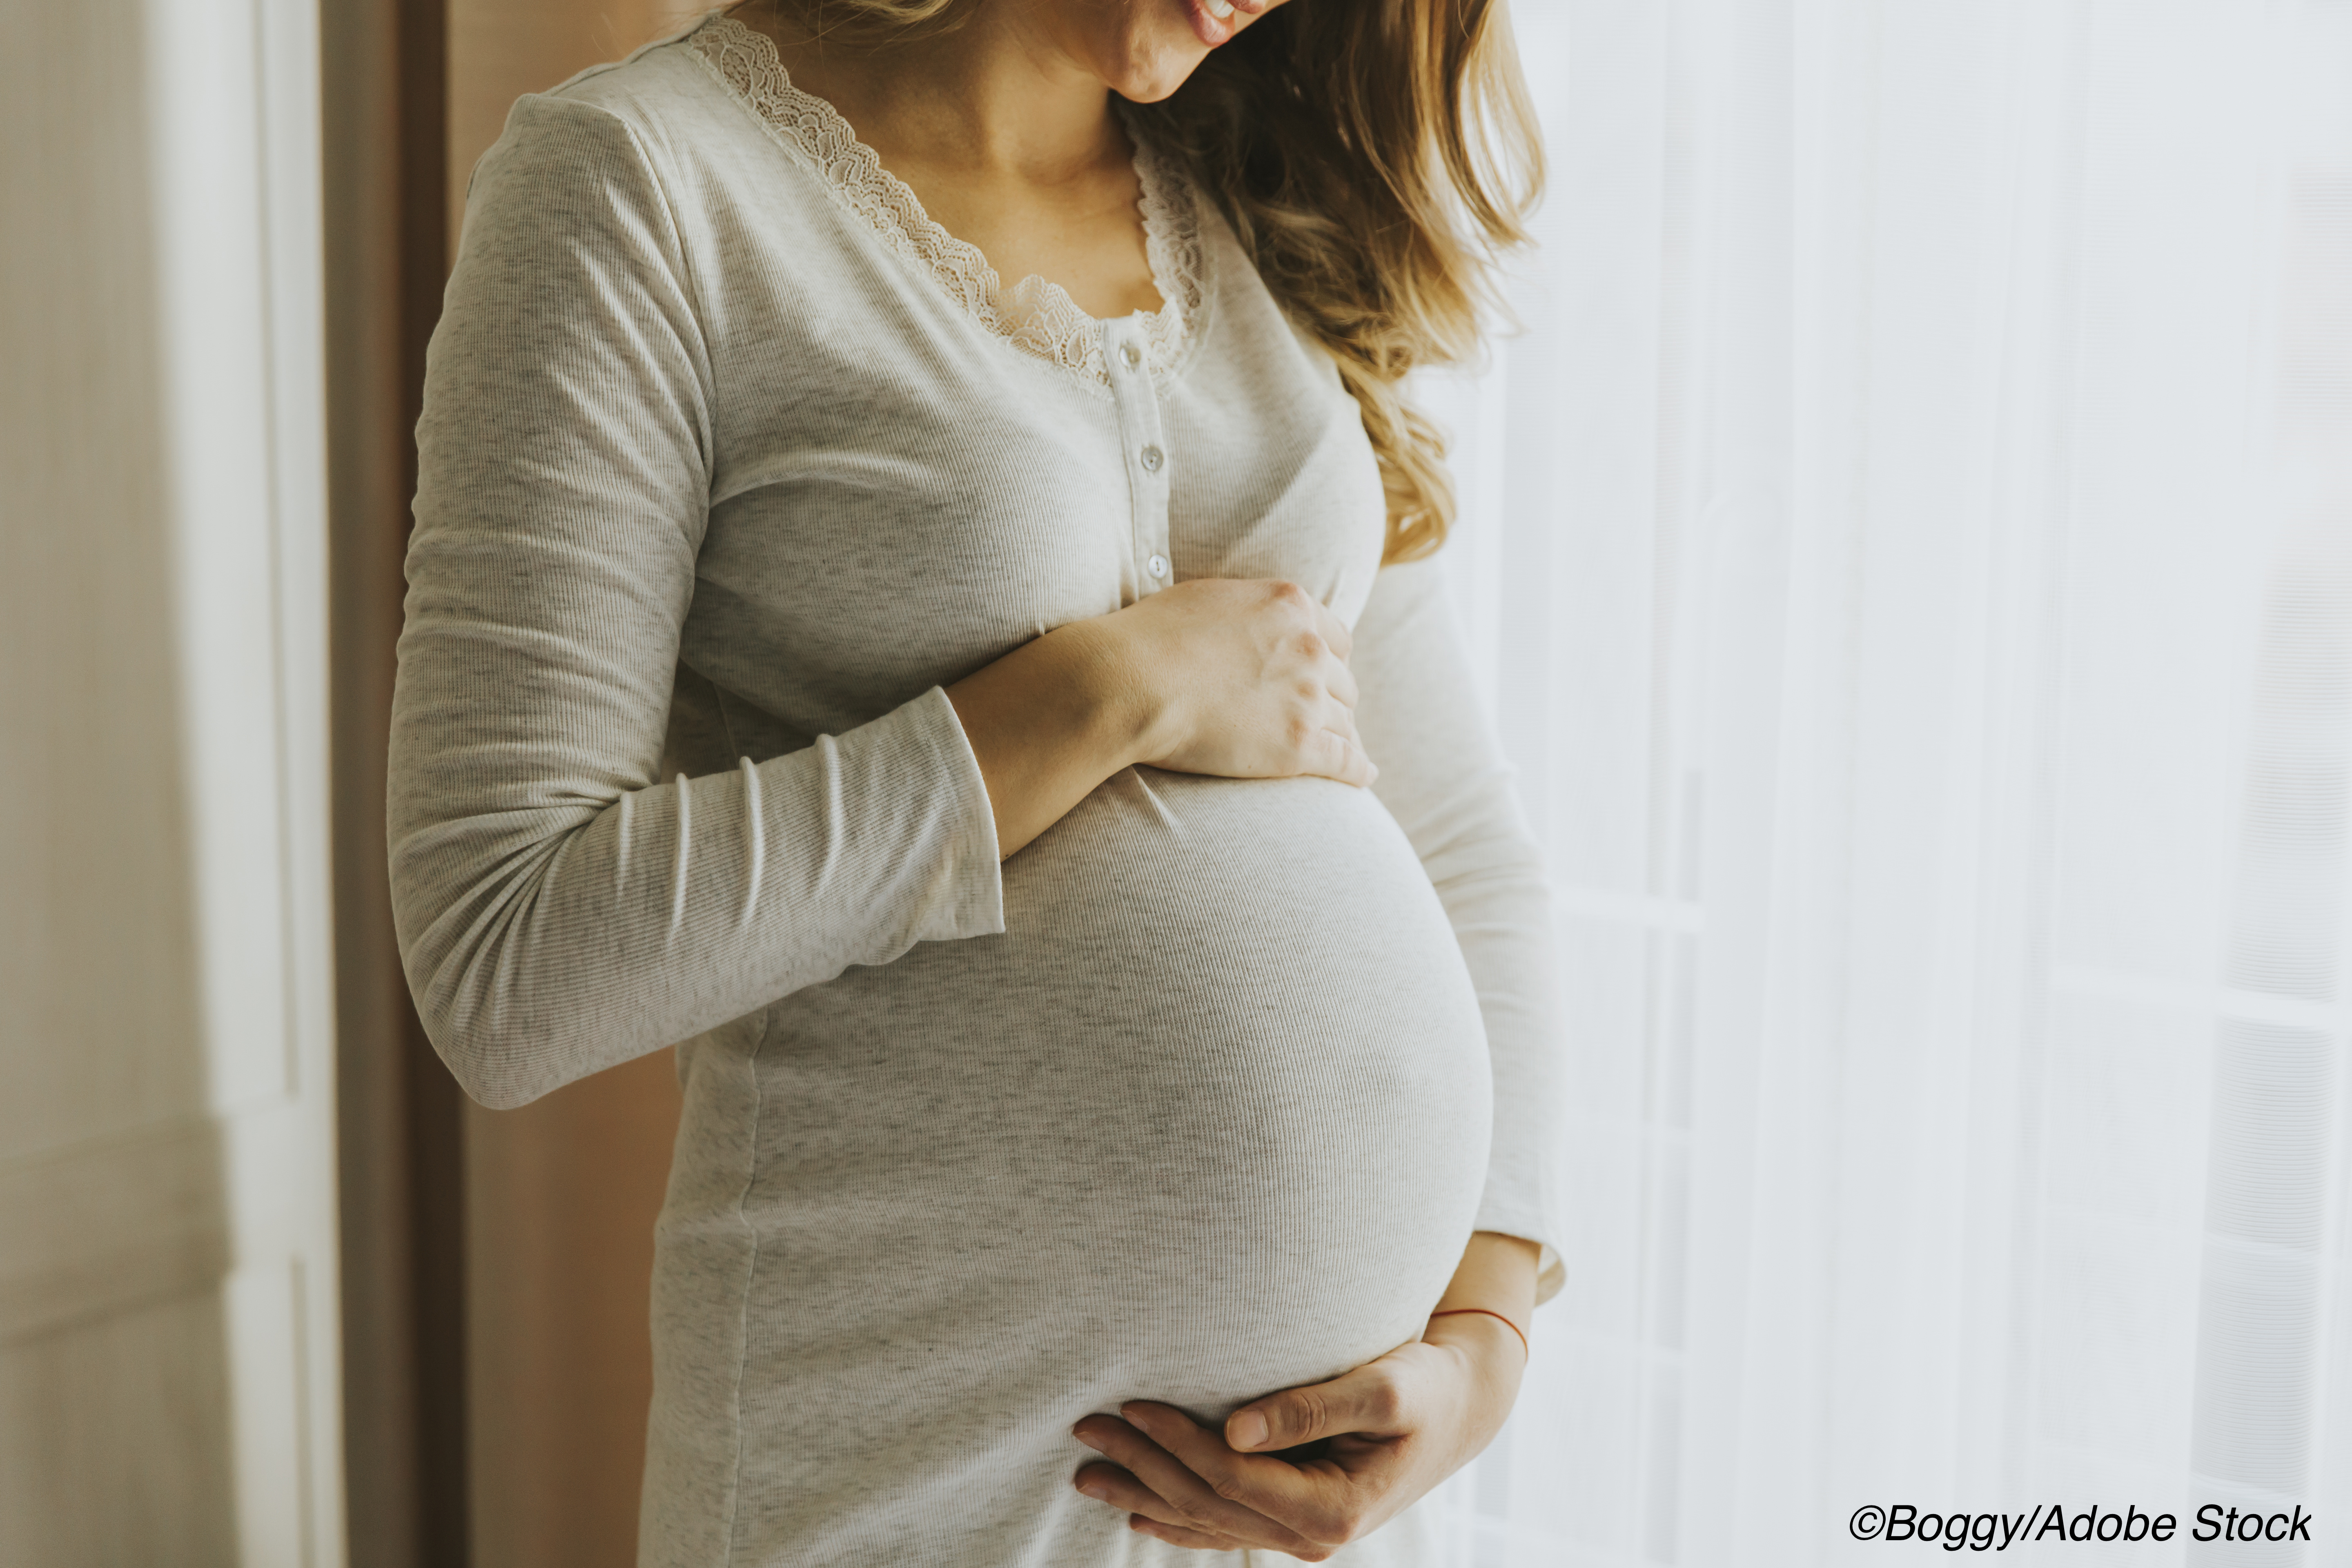 MONEAD Study: Does Pregnancy Lead to Increased Seizure Frequency in Women with Epilepsy?